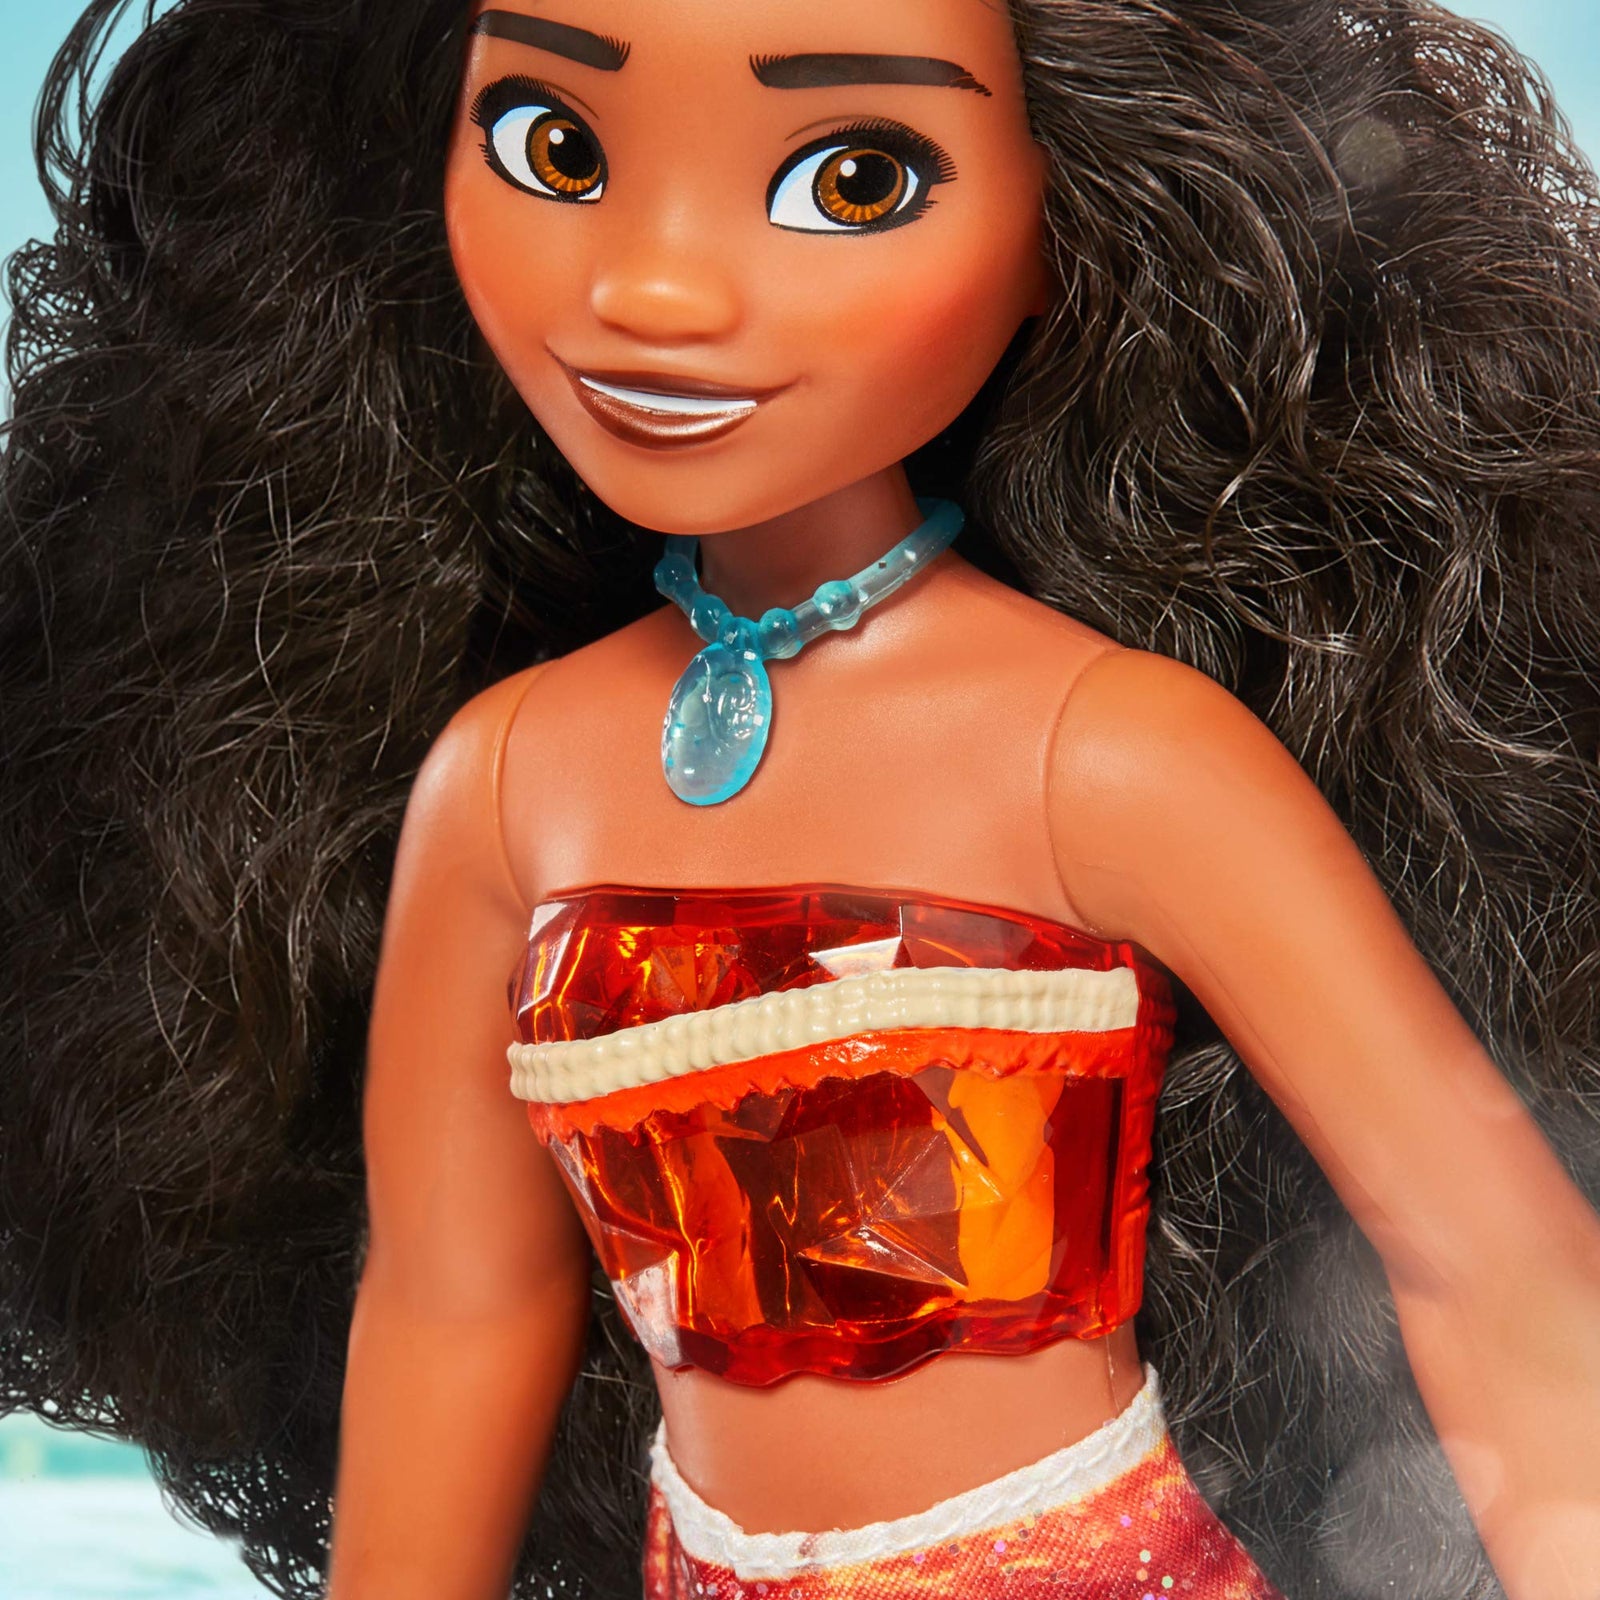 Disney Princess Royal Shimmer Moana Doll, Fashion Doll with Skirt and Accessories, Toy for Kids Ages 3 and Up